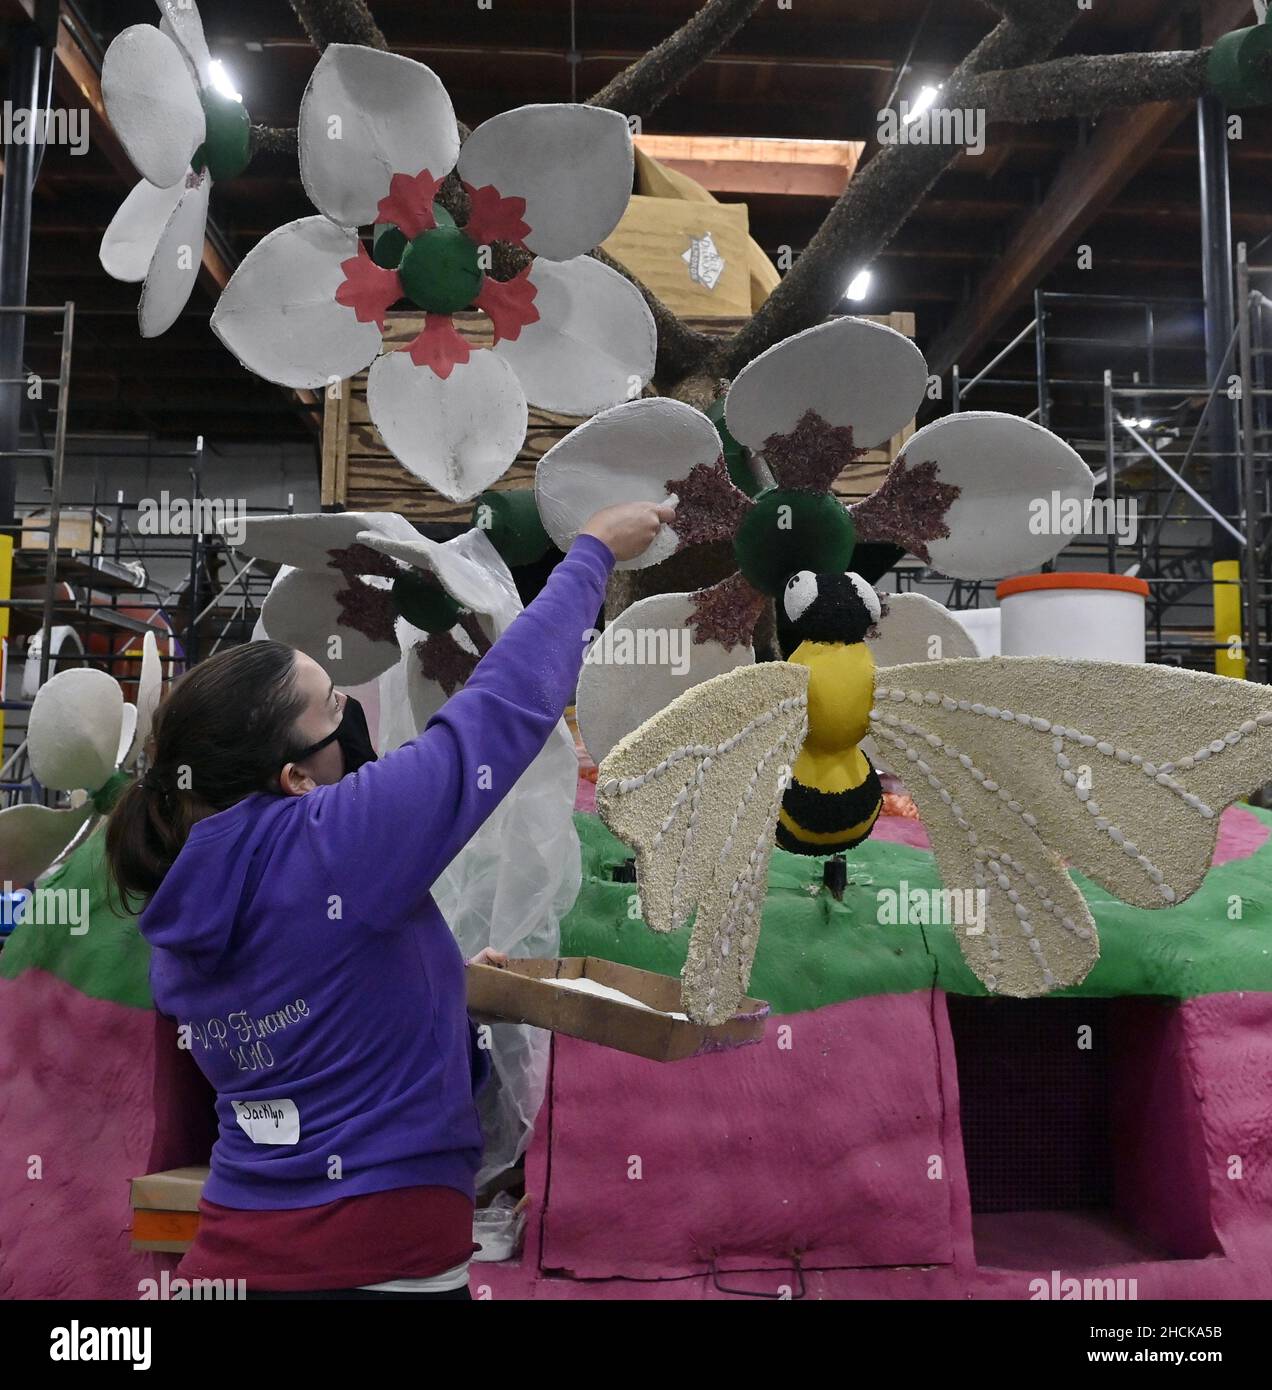 Pasadena, United States. 29th Dec, 2021. Volunteers use thousands of flowers and other plant material to prepare floats for the 133rd annual Tournament of Roses Parade in Pasadena, California on Wednesday, December 29, 2021. The Rose Parade will be televised live from Pasadena on January 1, 2022. Photo by Jim Ruymen/UPI Credit: UPI/Alamy Live News Stock Photo